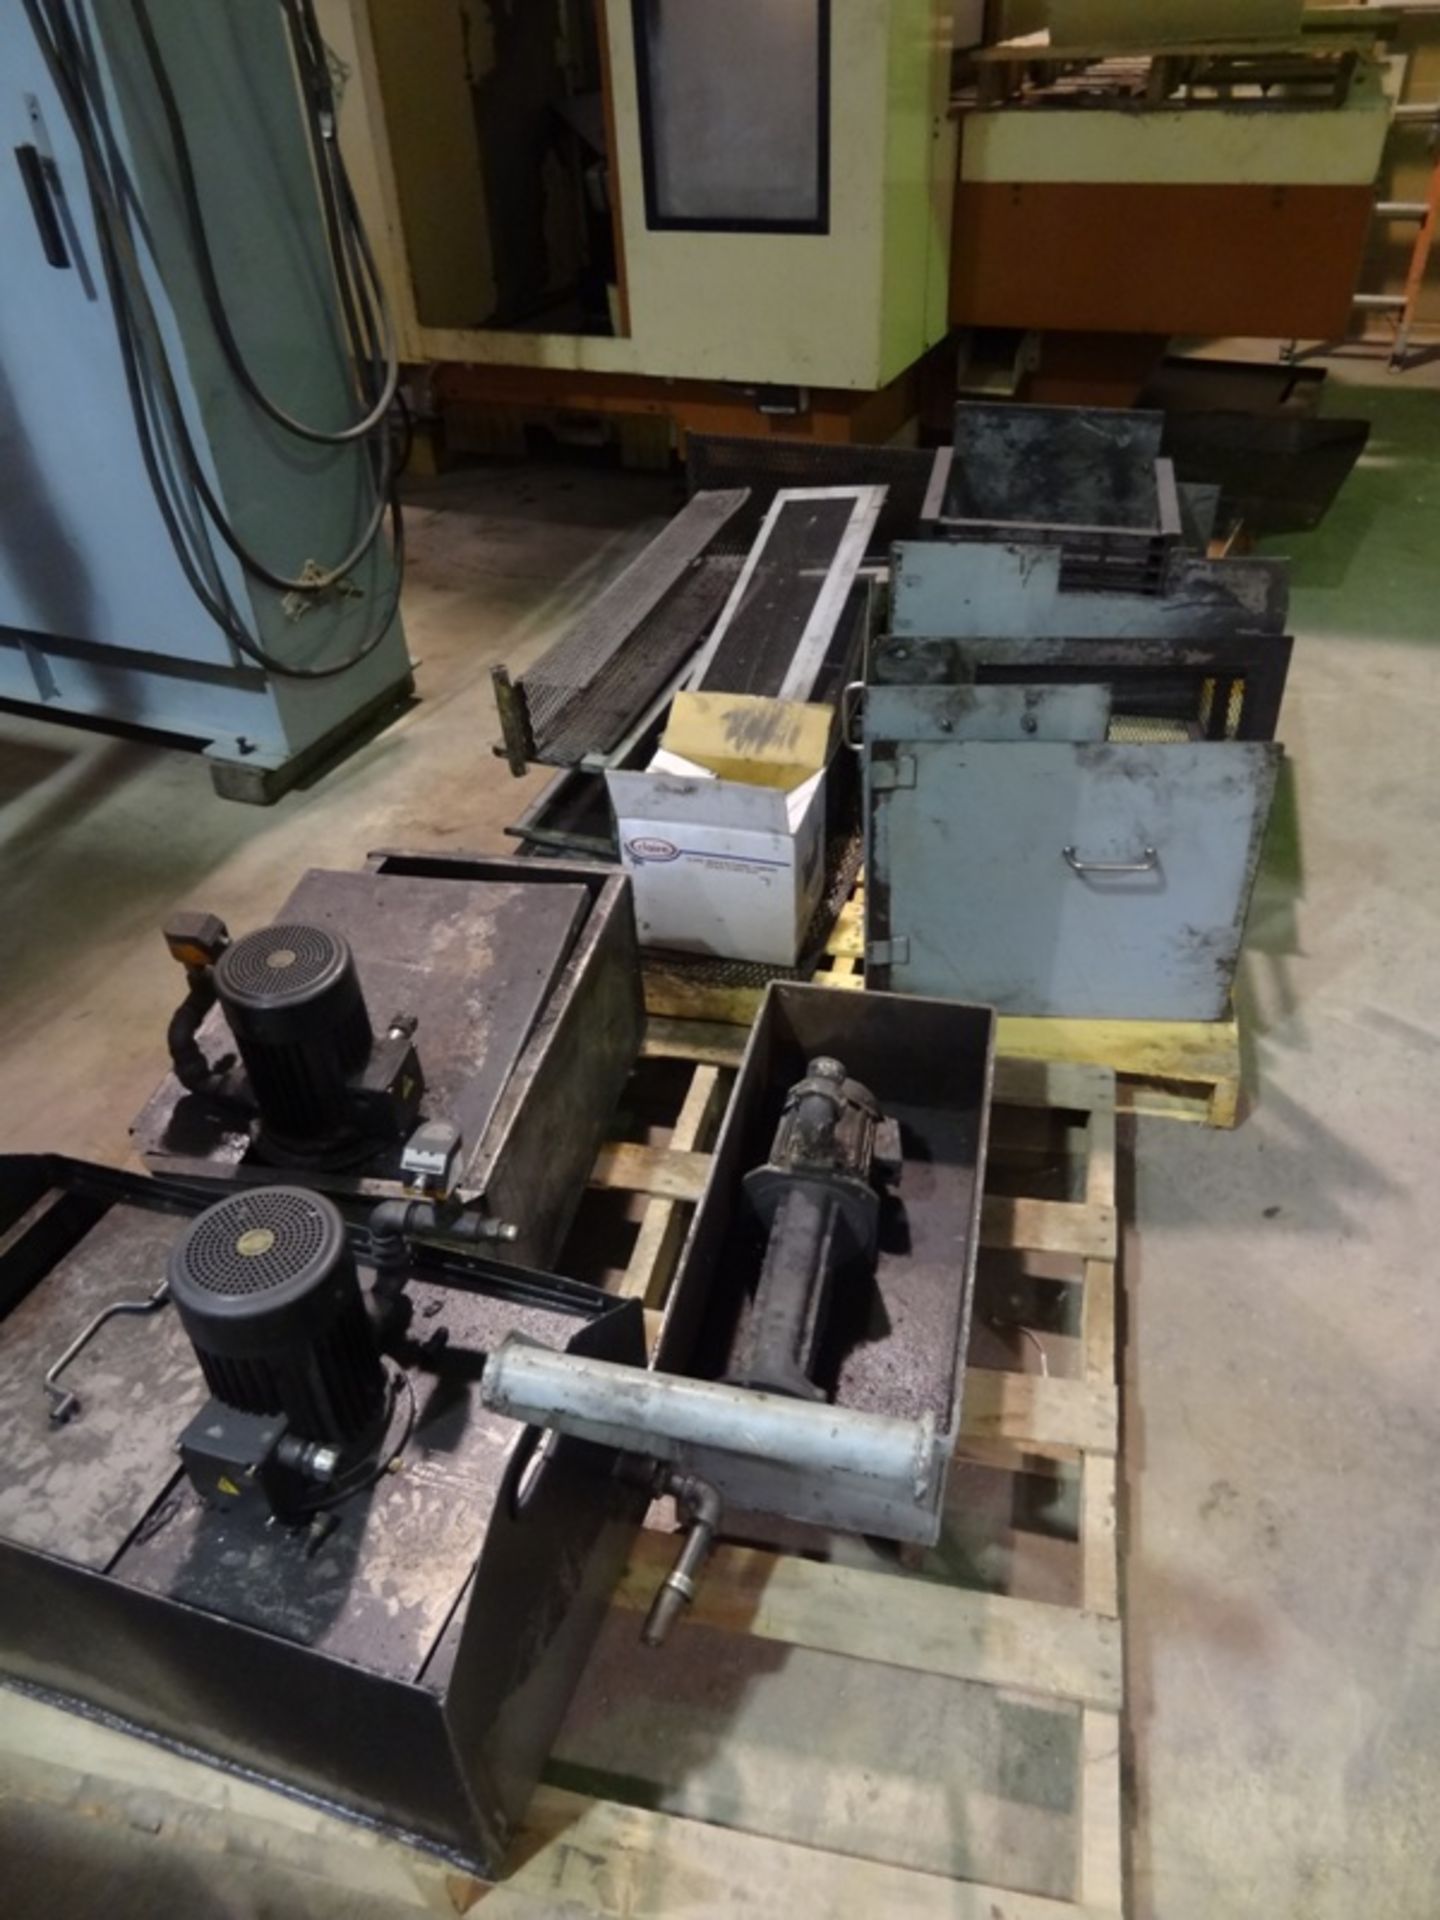 MICRON MODEL MD-450-RD CNC CENTERLESS GRINDER, SN 4551, YEAR 1997, LOCATION MI - Image 6 of 10